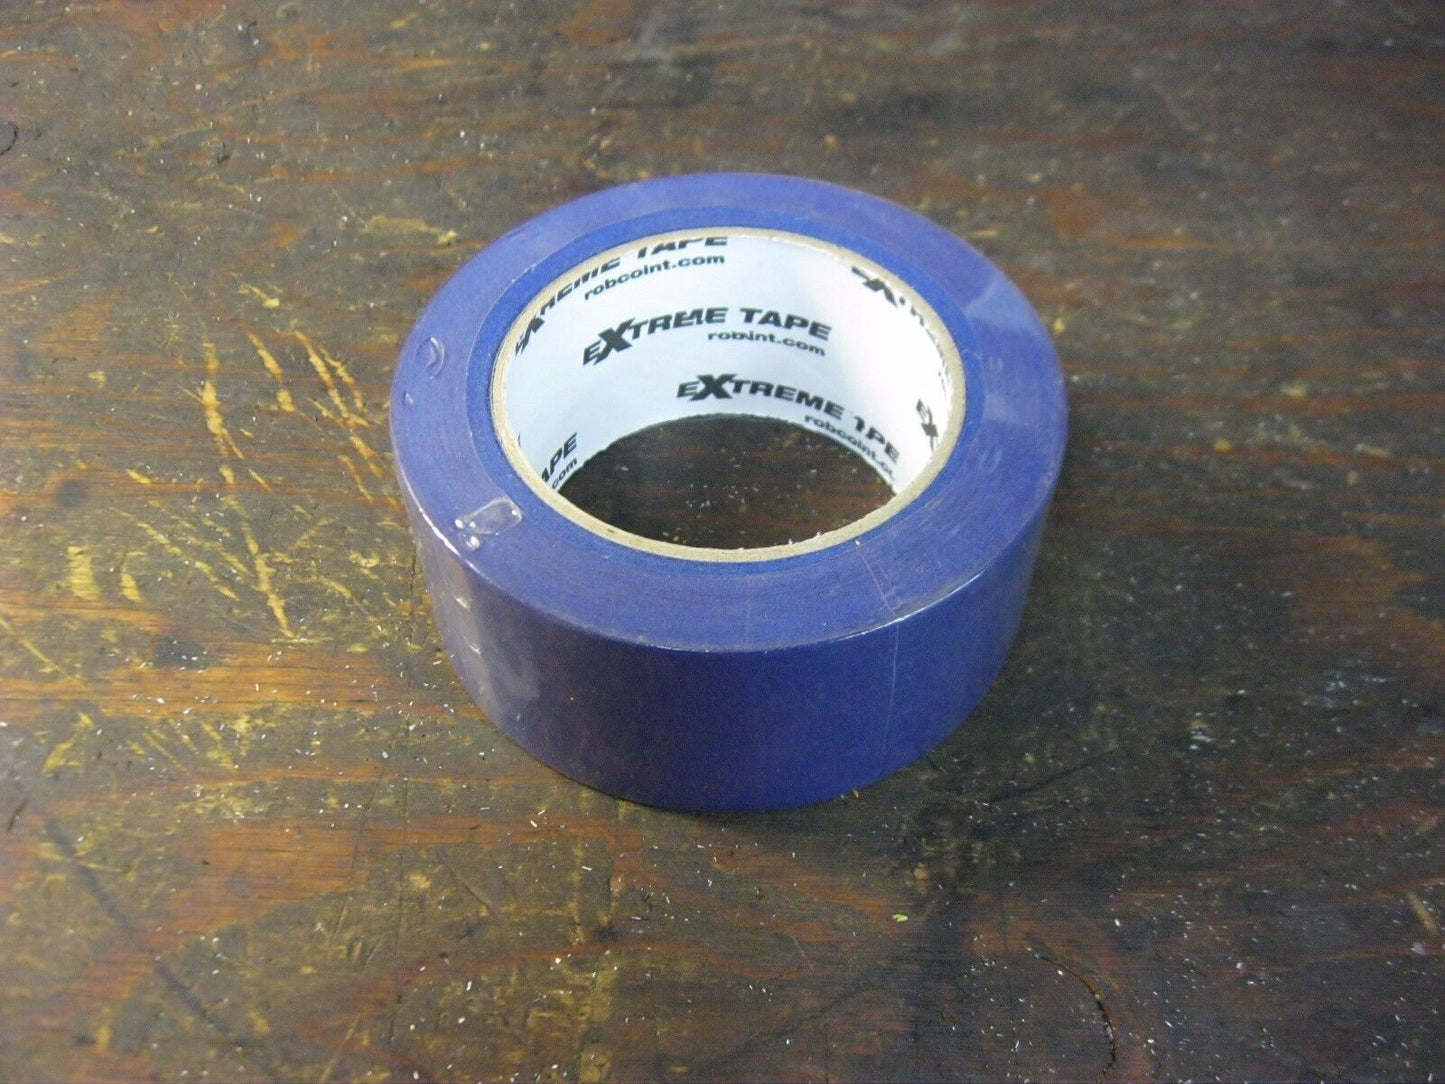 9 ROLLS BLUE 14 DAY PAINTERS TAPE 48 MM WIDE x 55M (180 FT)